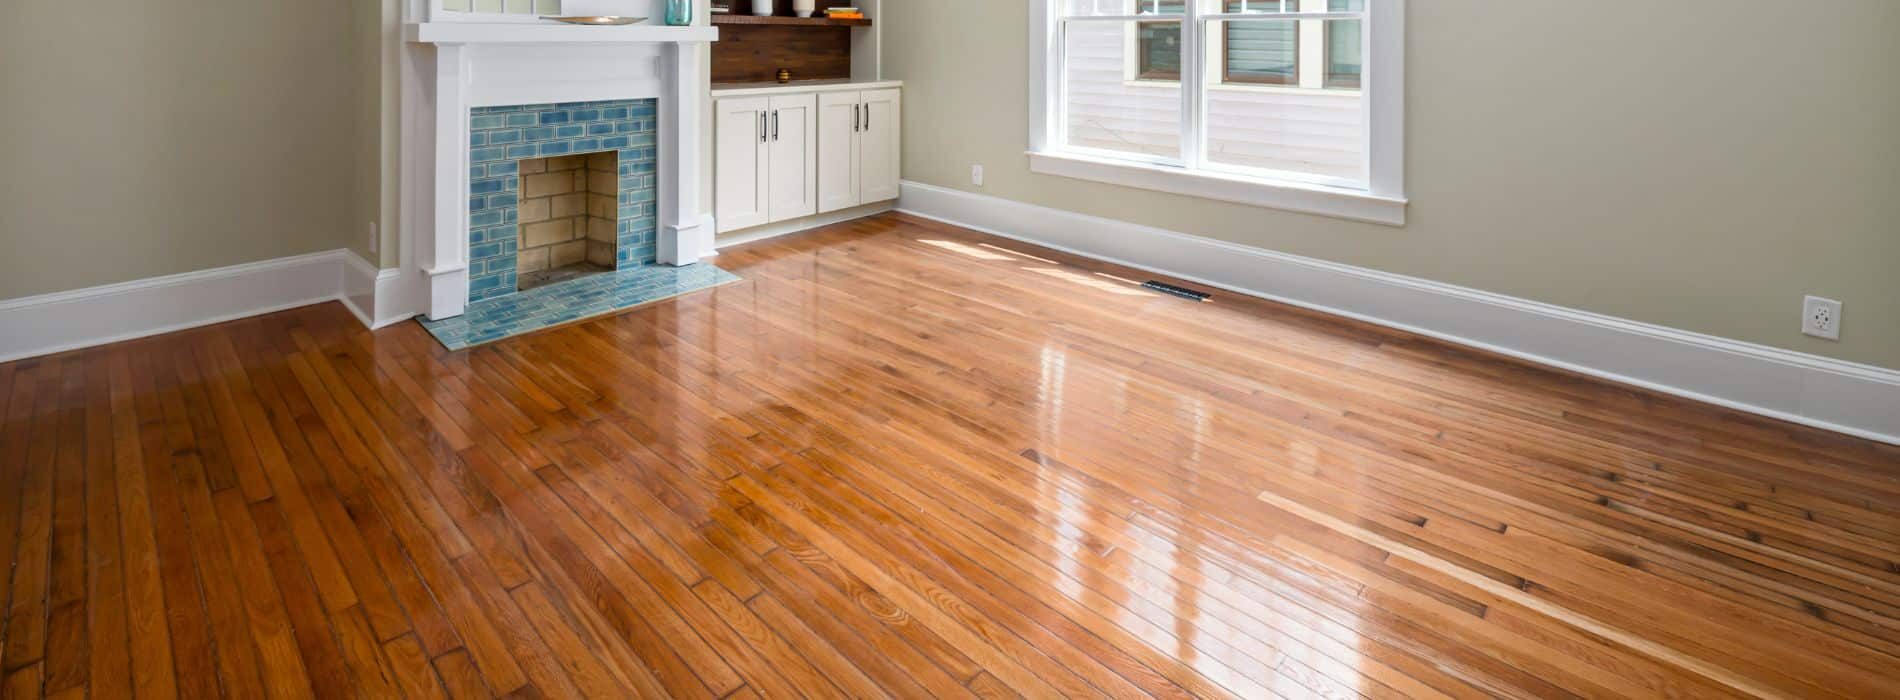 Expertly restored 6-year-old hardwood floor in Alton, GU34. Mr Sander® used Bona 2.5K Frost whitewashing and Traffic HD 15% sheen matte lacquer. This durable and stunning finish ensures long-lasting beauty. Perfectly blending style and durability for a truly remarkable floor.